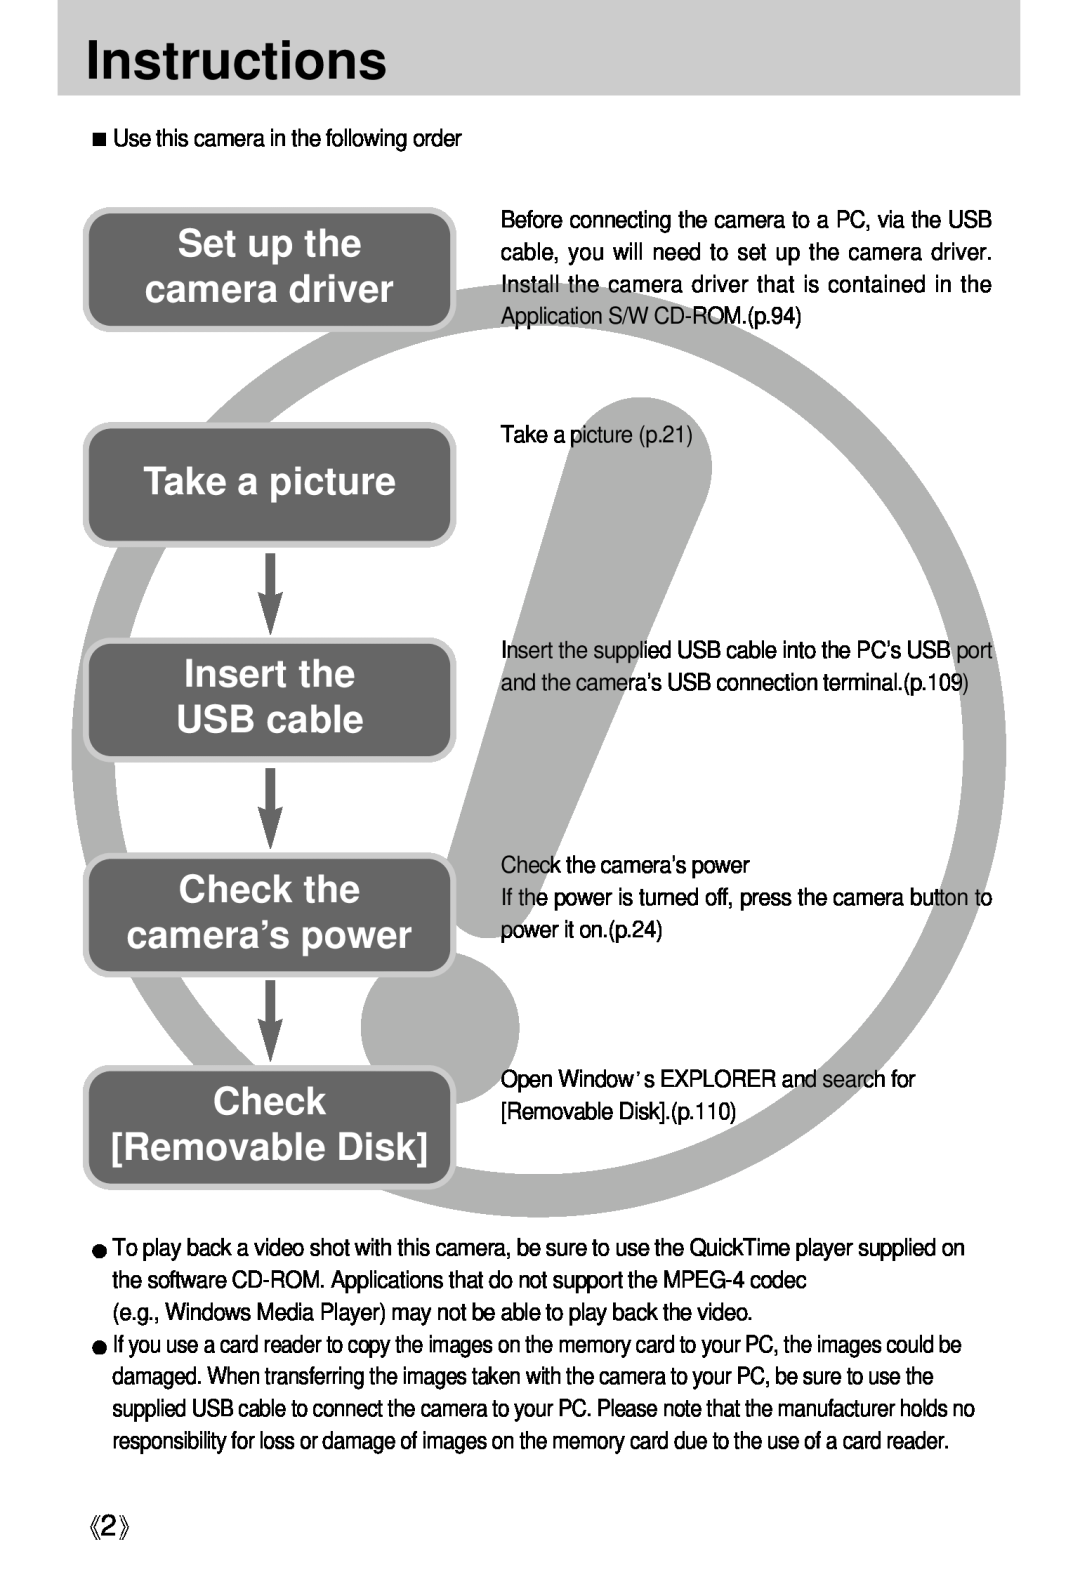 Samsung Digimax U-CA user manual Instructions, Set up the camera driver Take a picture Insert the USB cable 